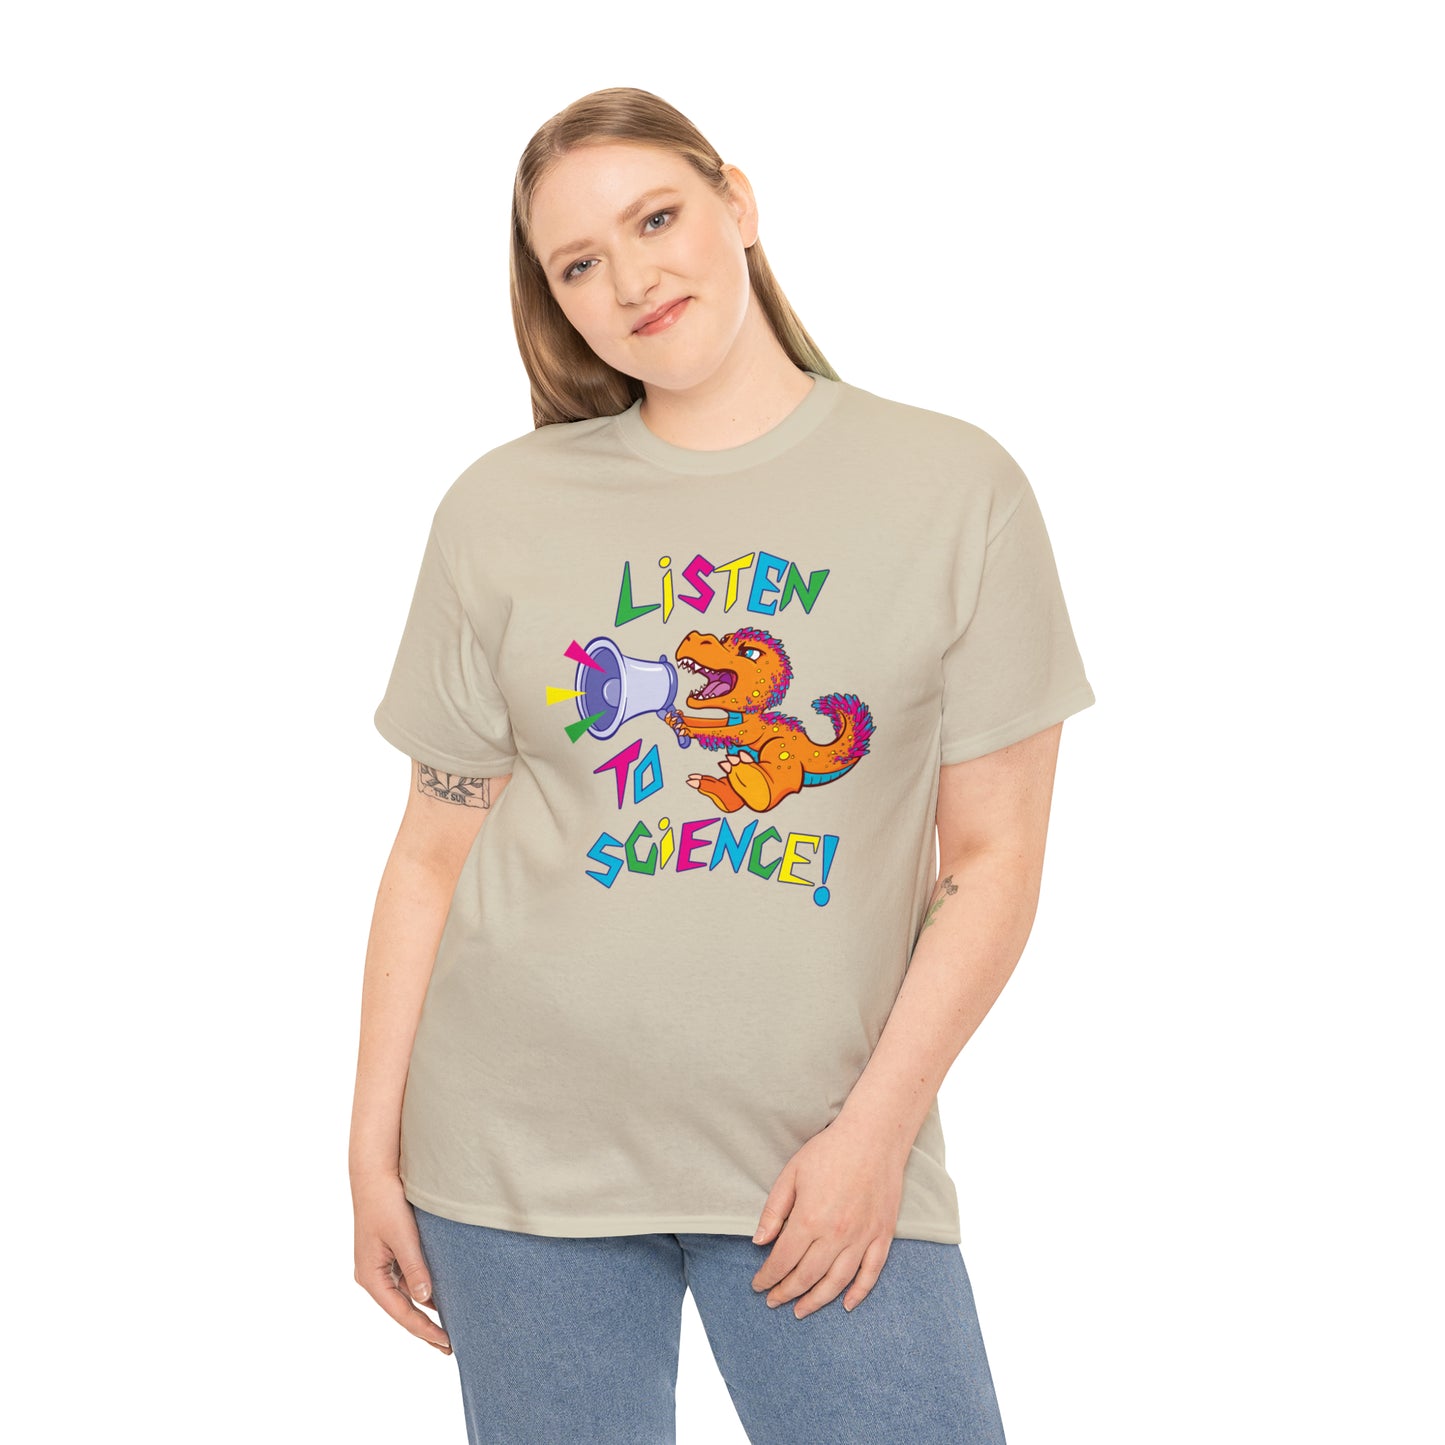 "Listen to Science!" - Heavy Cotton Tee (Multiple Color Options)